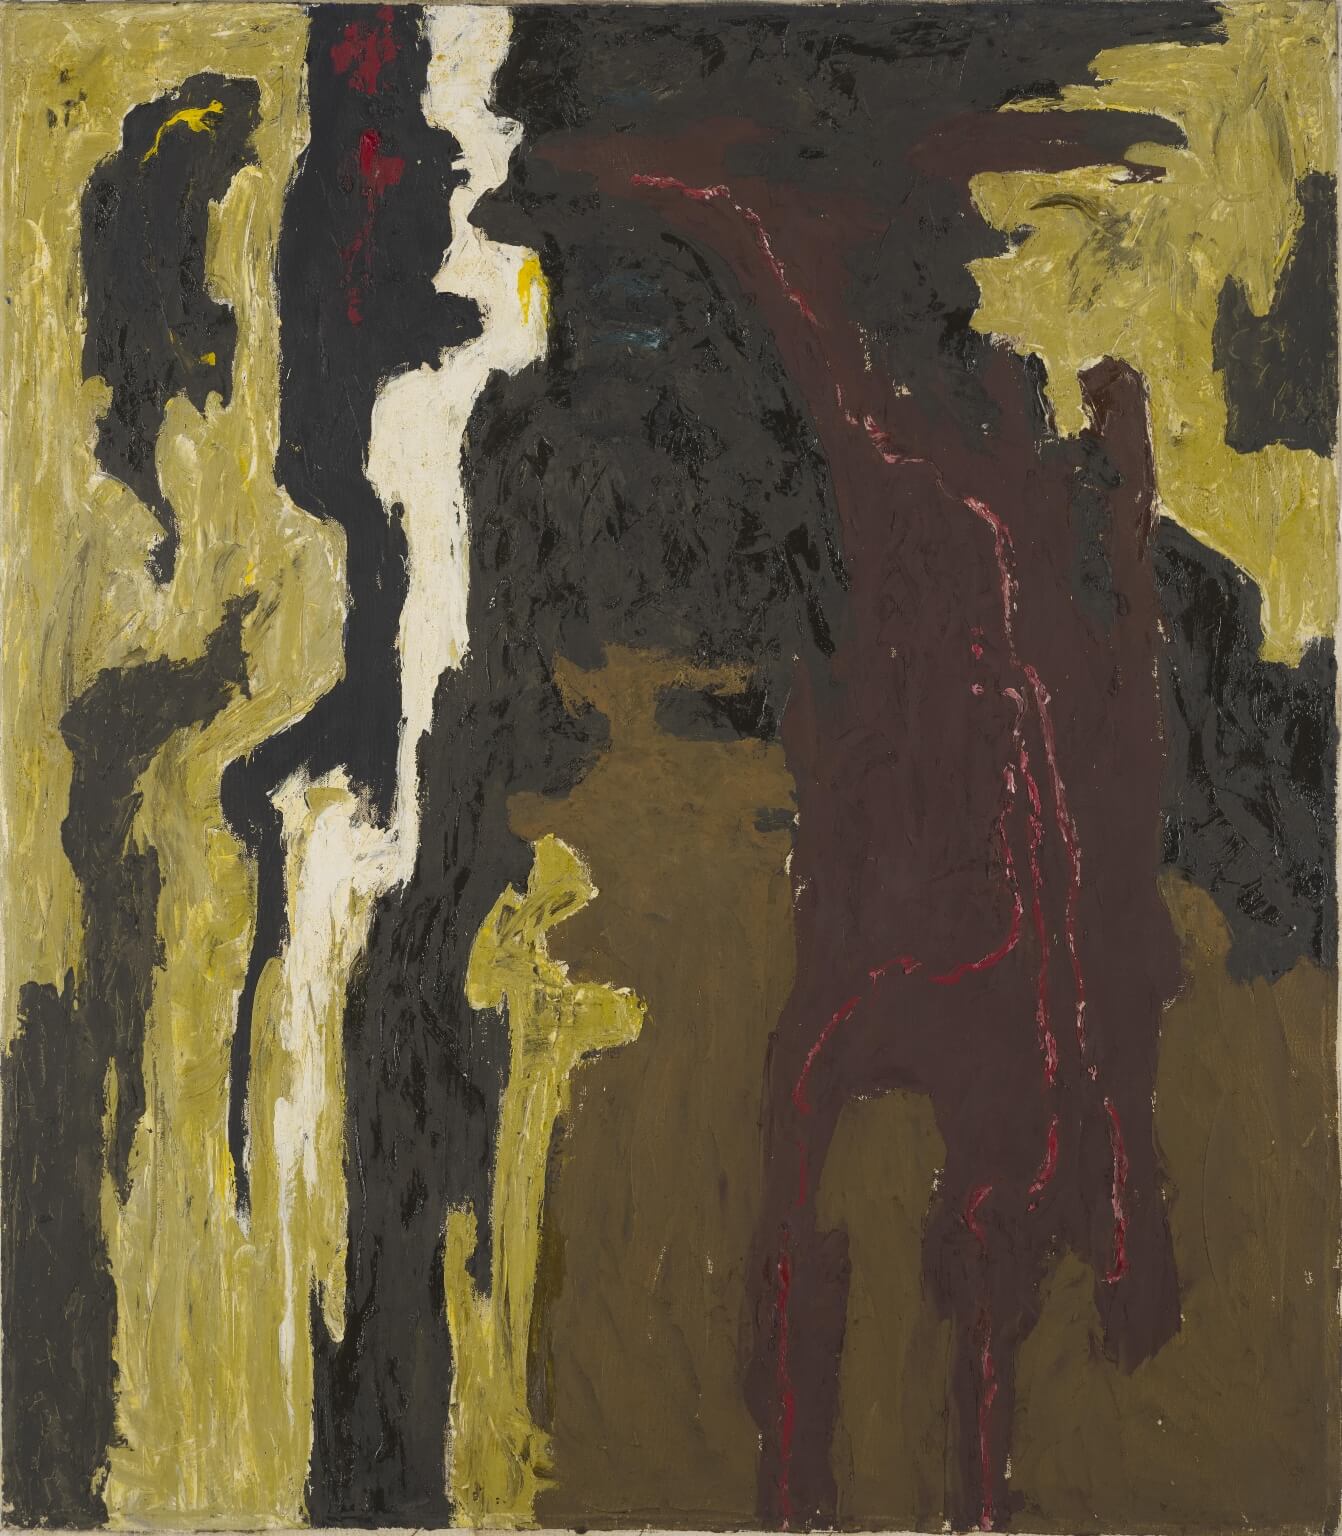 Abstract painting with brown, tan, white, yellow, and black splotches and squiggles